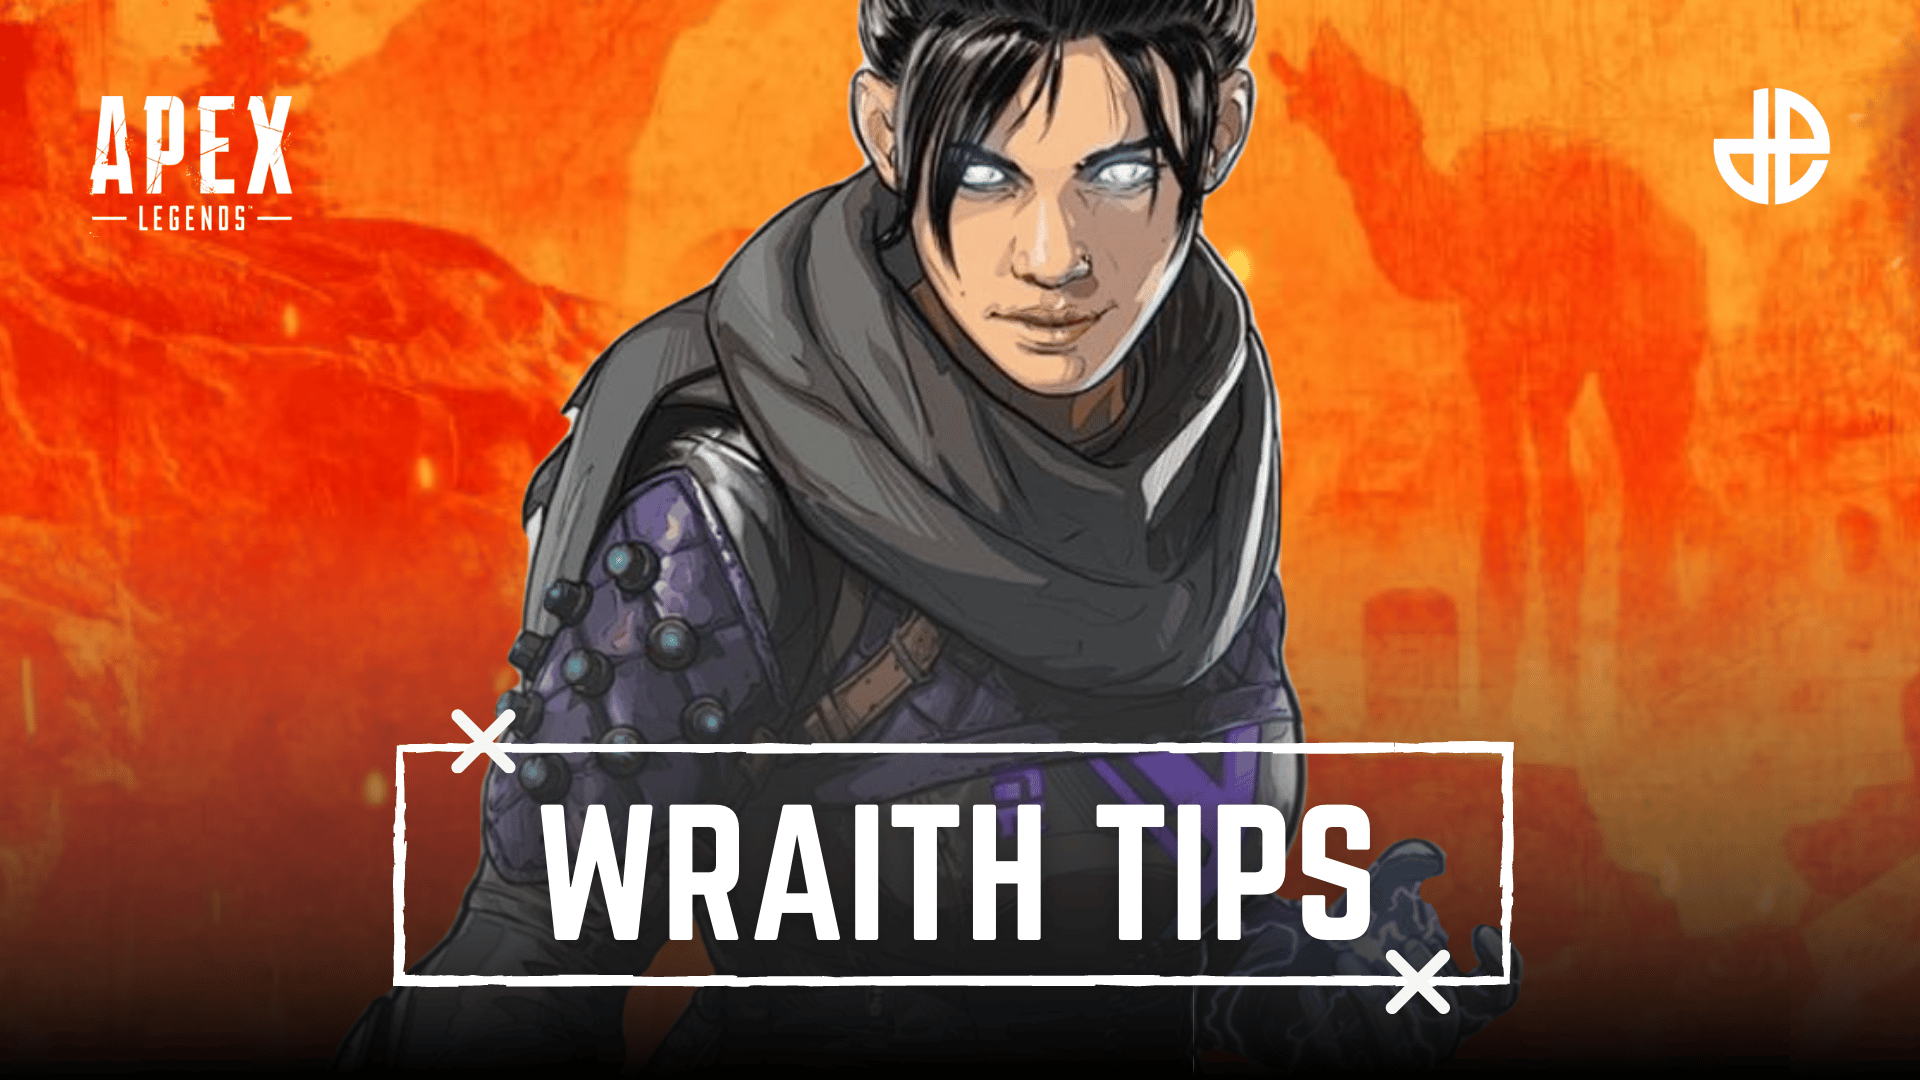 Game Guides, How To, Strategy, Walkthroughs, Tips - Twinfinite